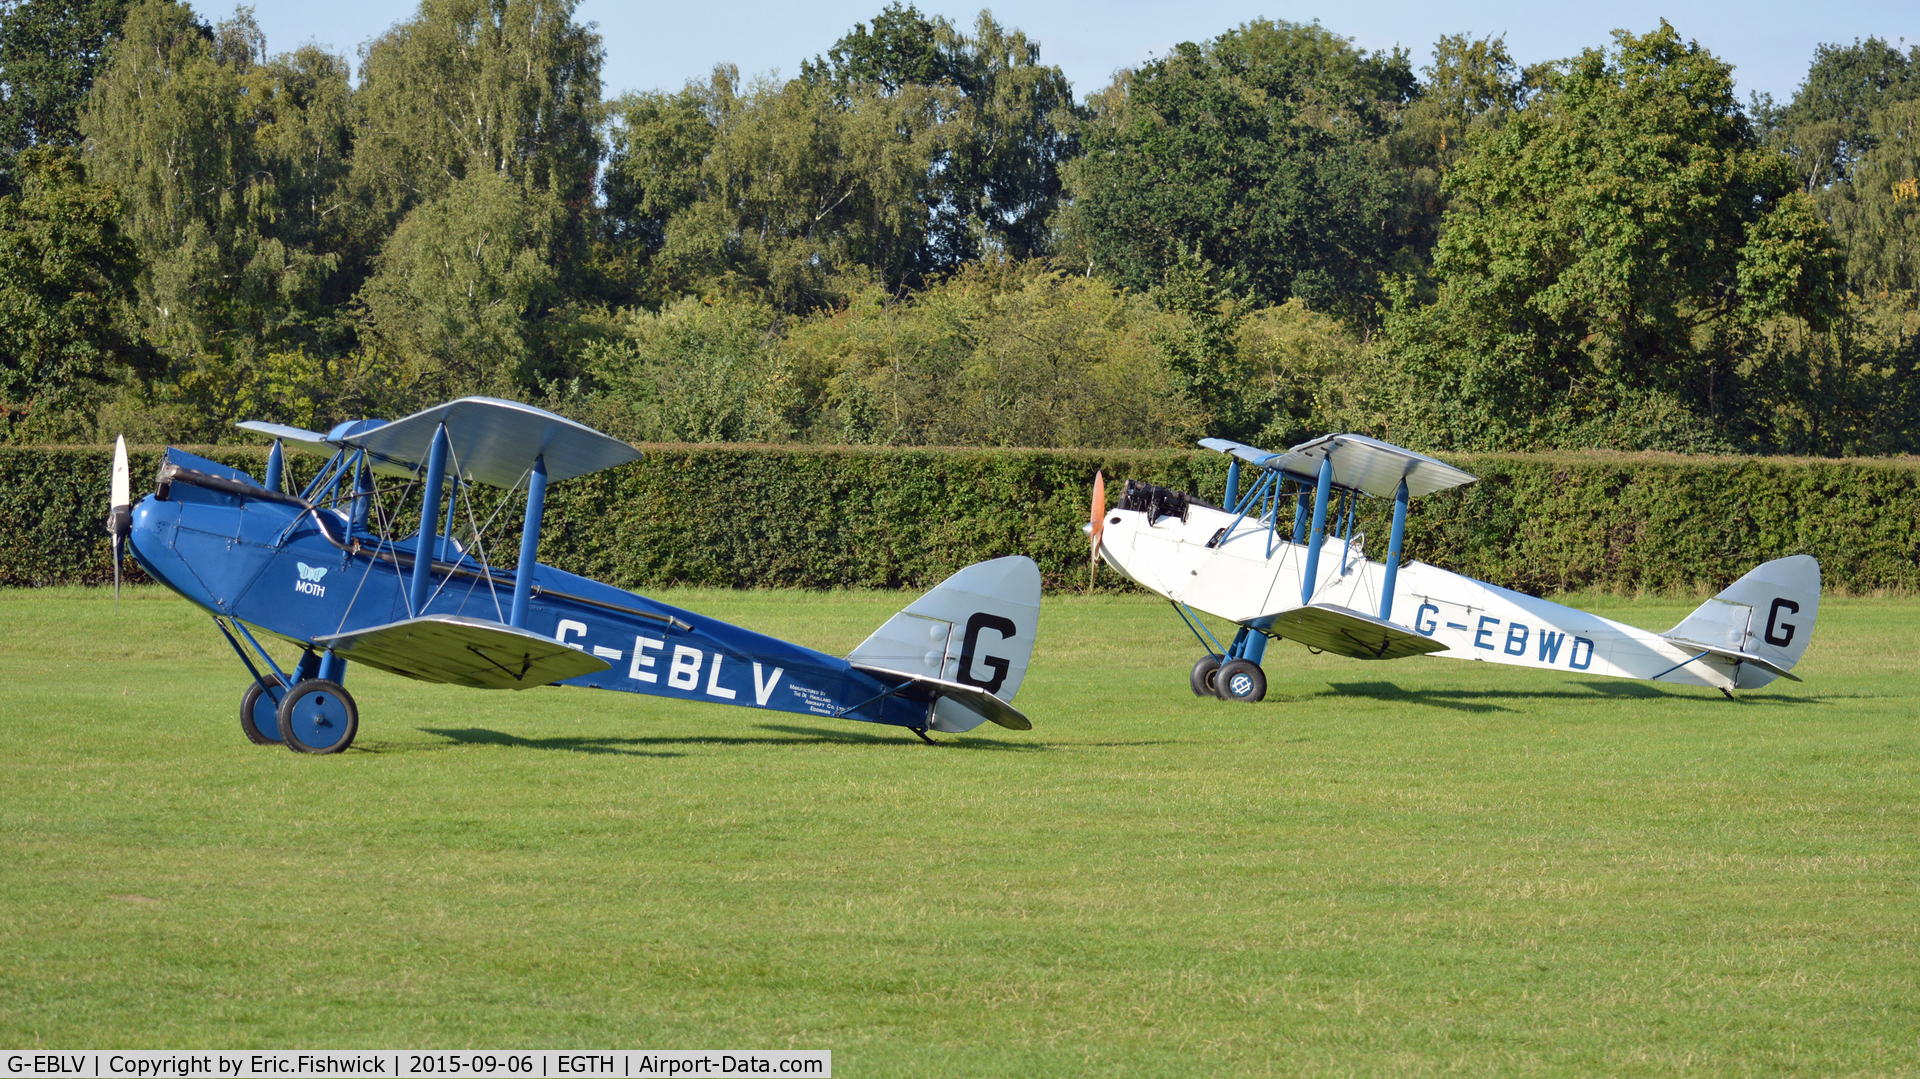 G-EBLV, 1925 De Havilland DH-60 Moth C/N 188, 5. A pair of Moths at The Shuttleworth Collection's Pagent Airshow, Sep. 2015.